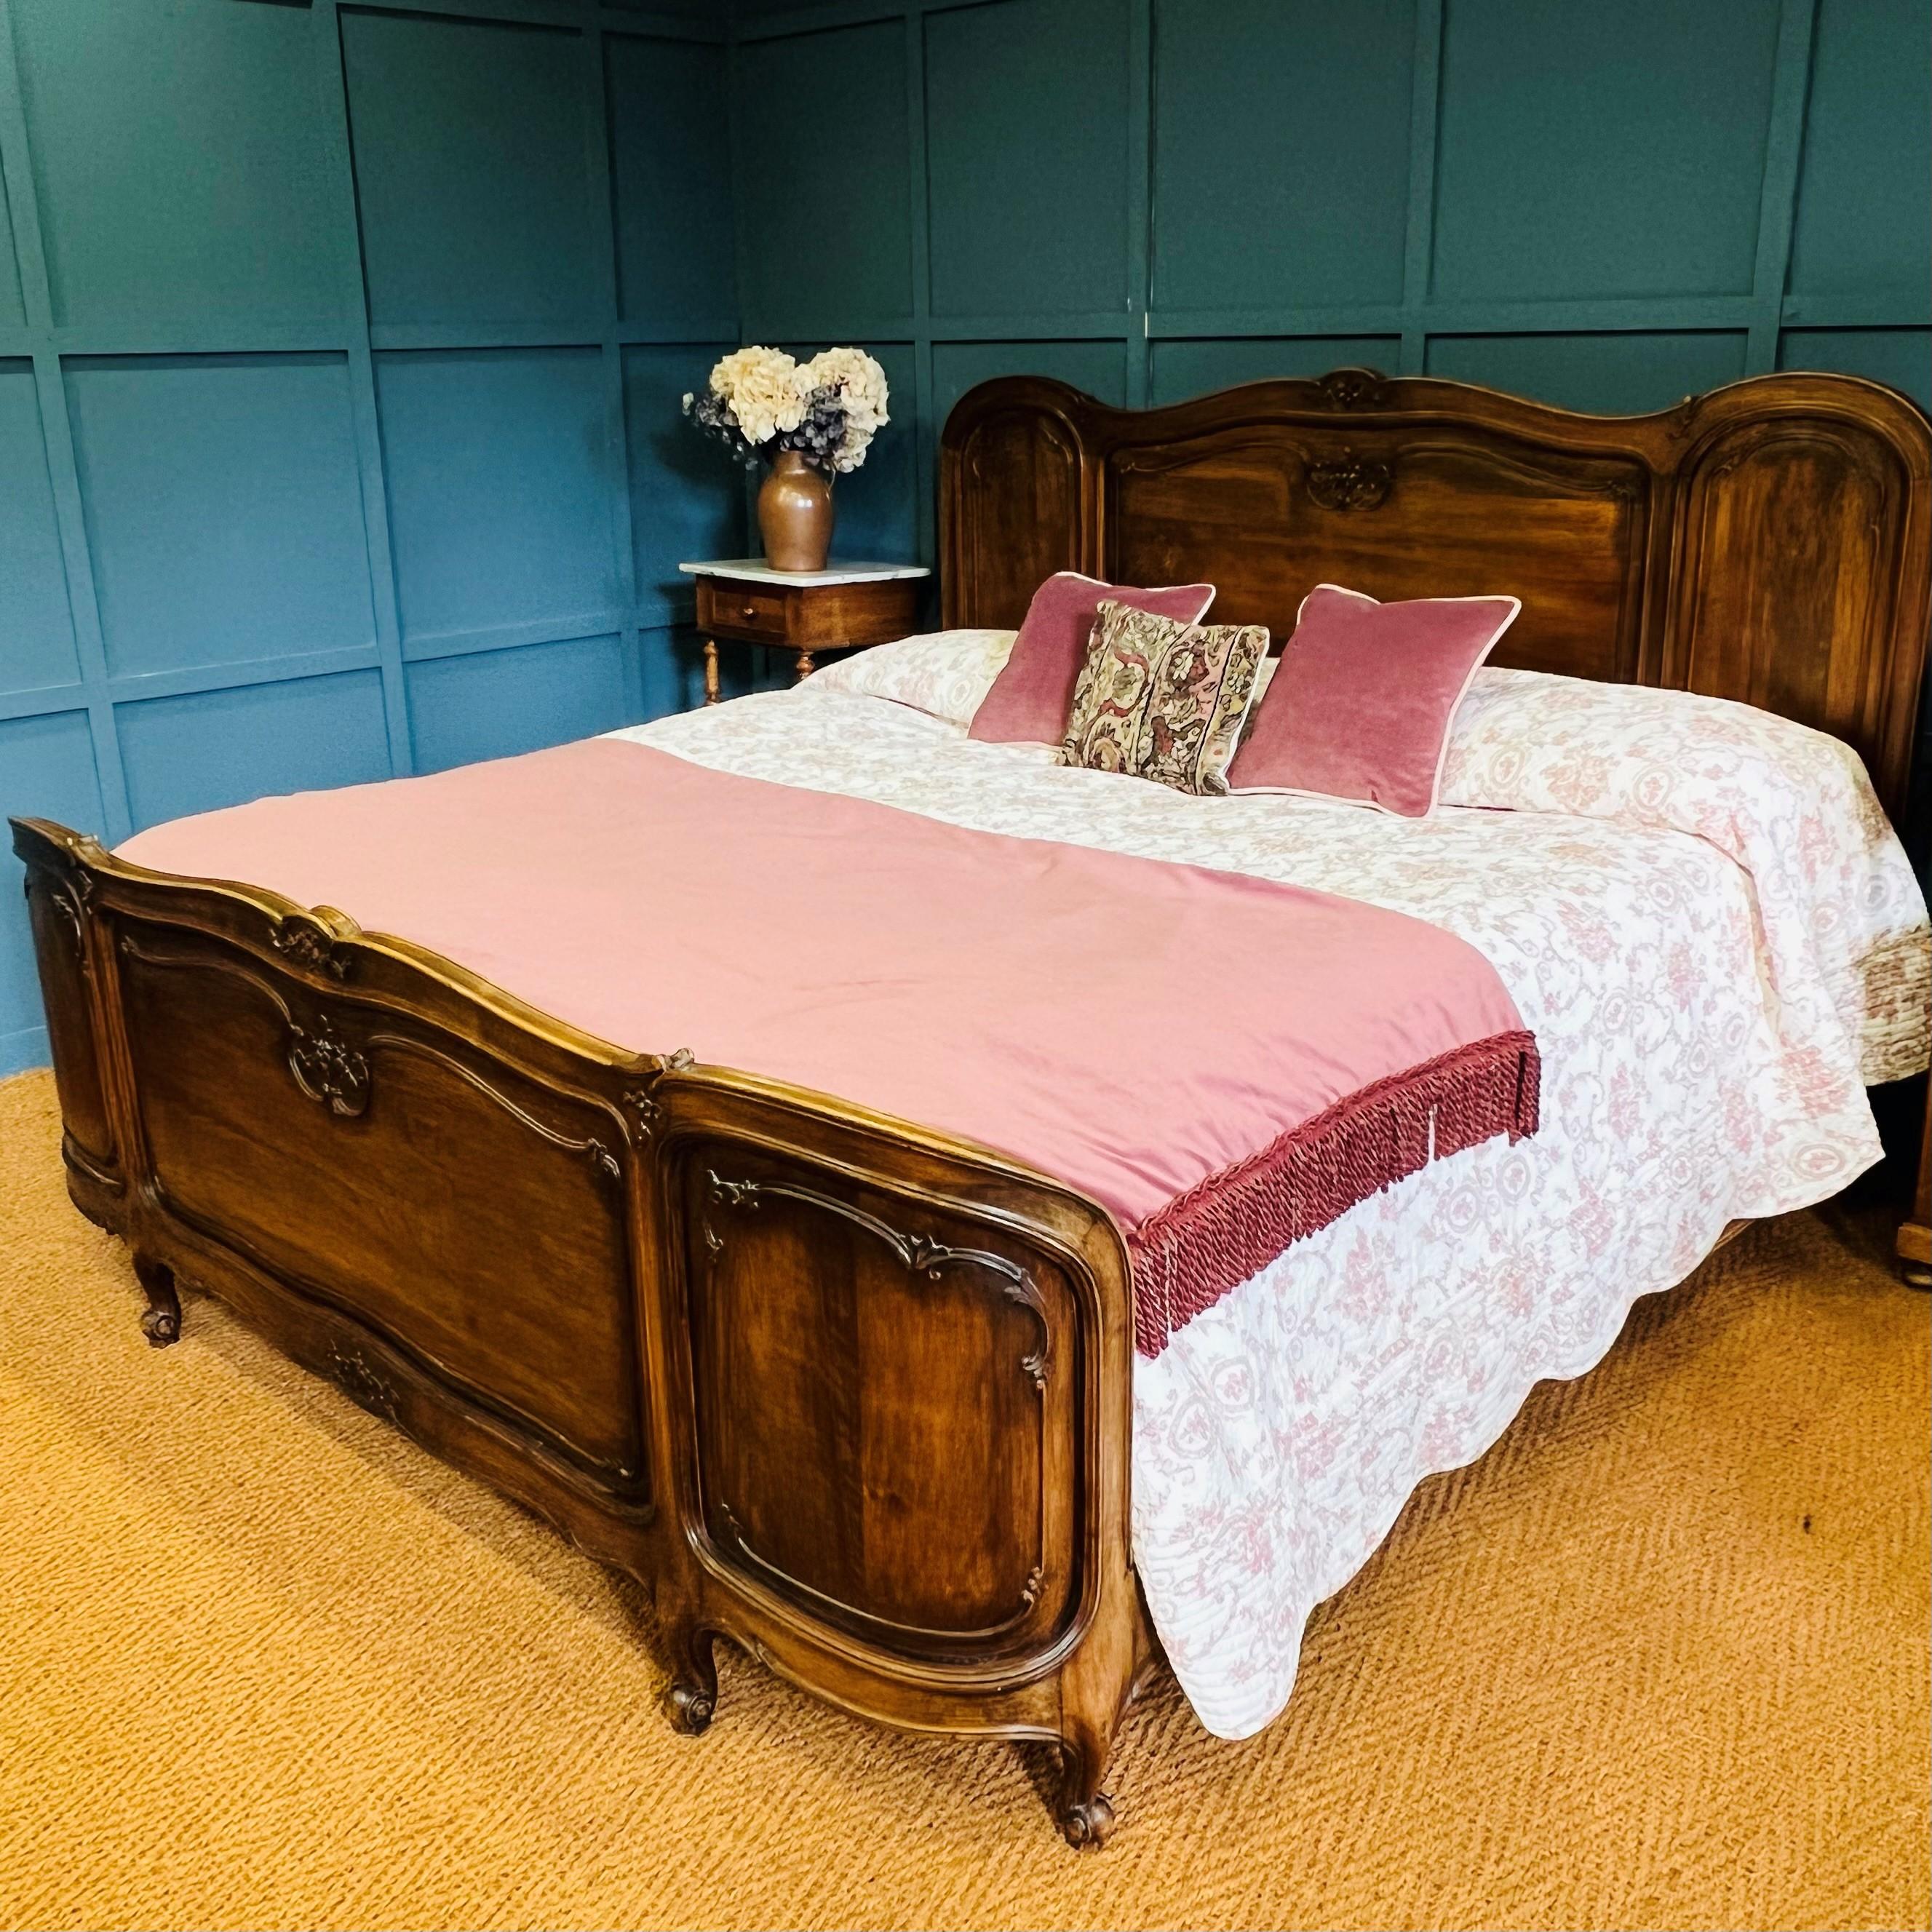 This handsome extra large antique French bedstead measures in at over 6’ (200cm) wide. Made of walnut, with a demi corbeille foot end and detailed carvings arranged within decorative panels, it is sure to make a statement in its new surroundings..